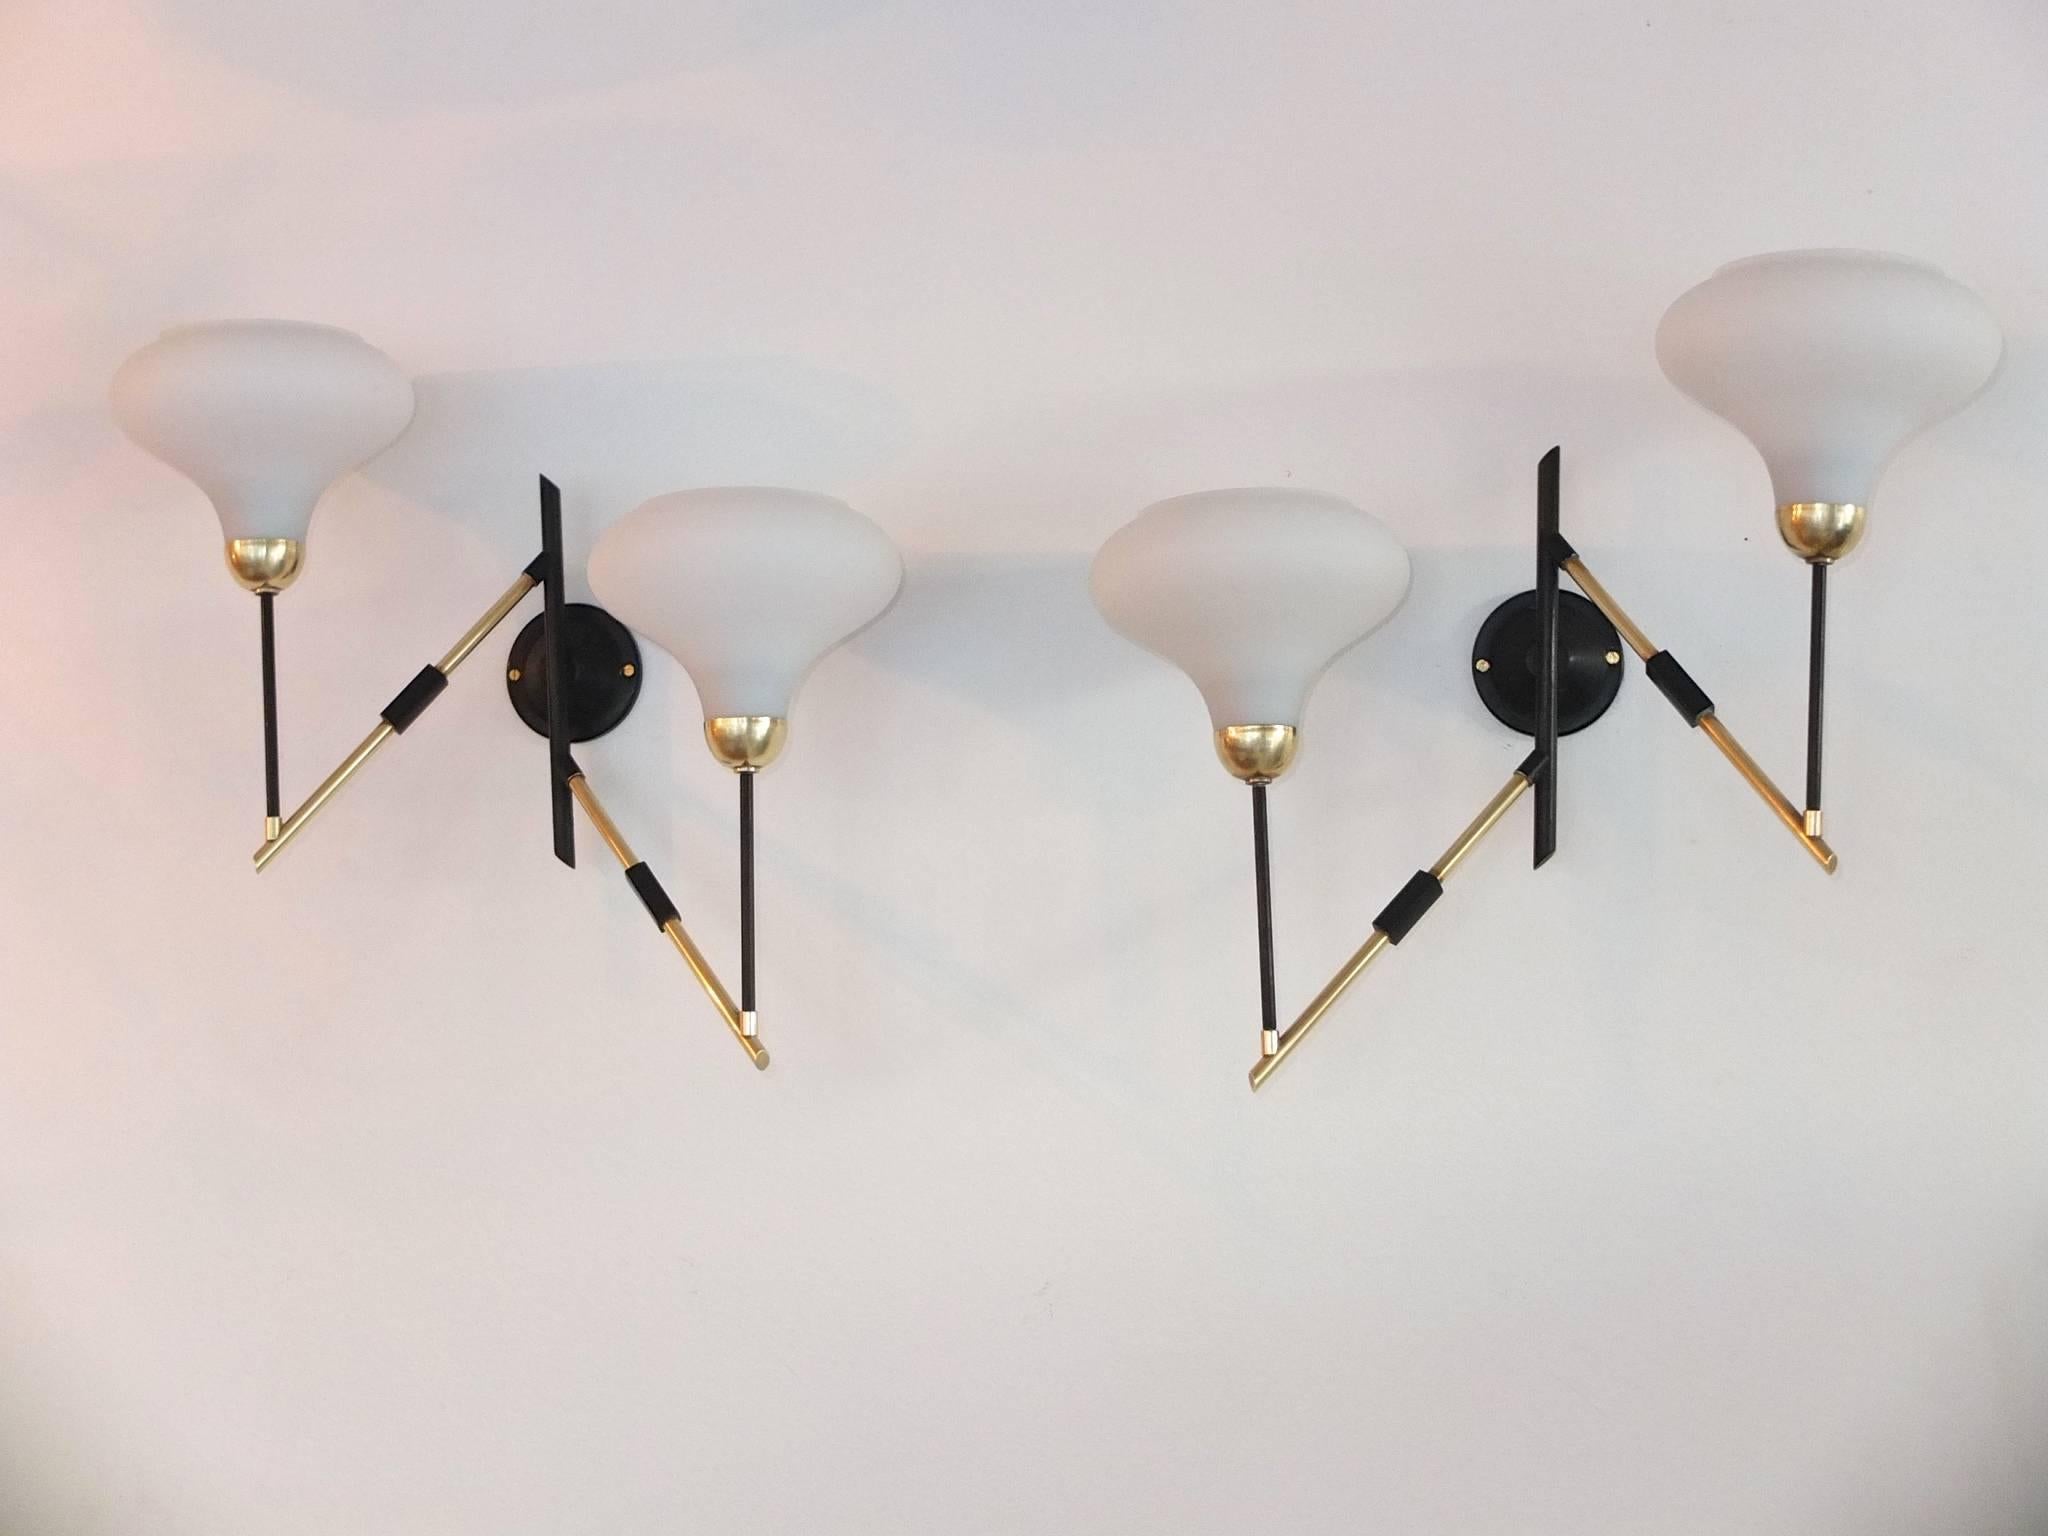 Pair of 1950s Italian sconces attributed to Stilnovo. Structure is tubular brass and black enameled metal with brass bobeche and white opaline inverted bell-form shades.

Each sconce holds two candelabra size bulbs up to 60 watts each.

We can